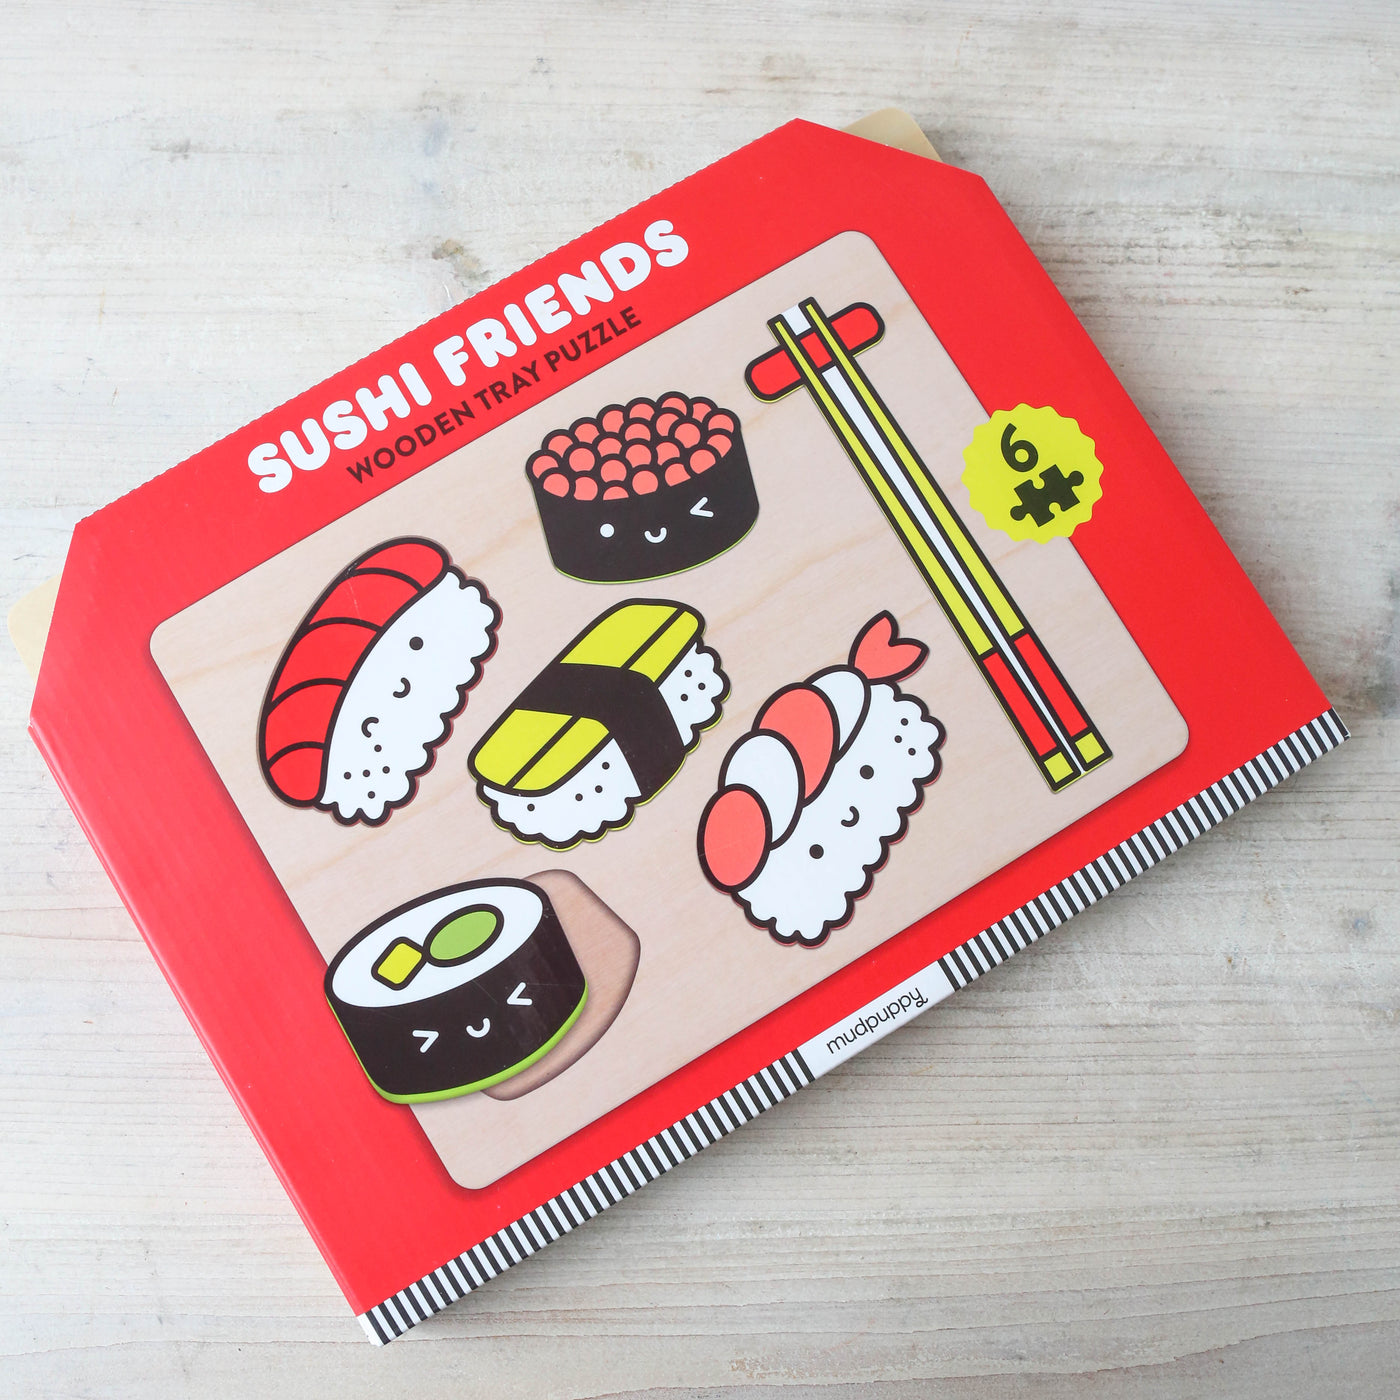 Sushi Friends Wooden Tray Puzzle